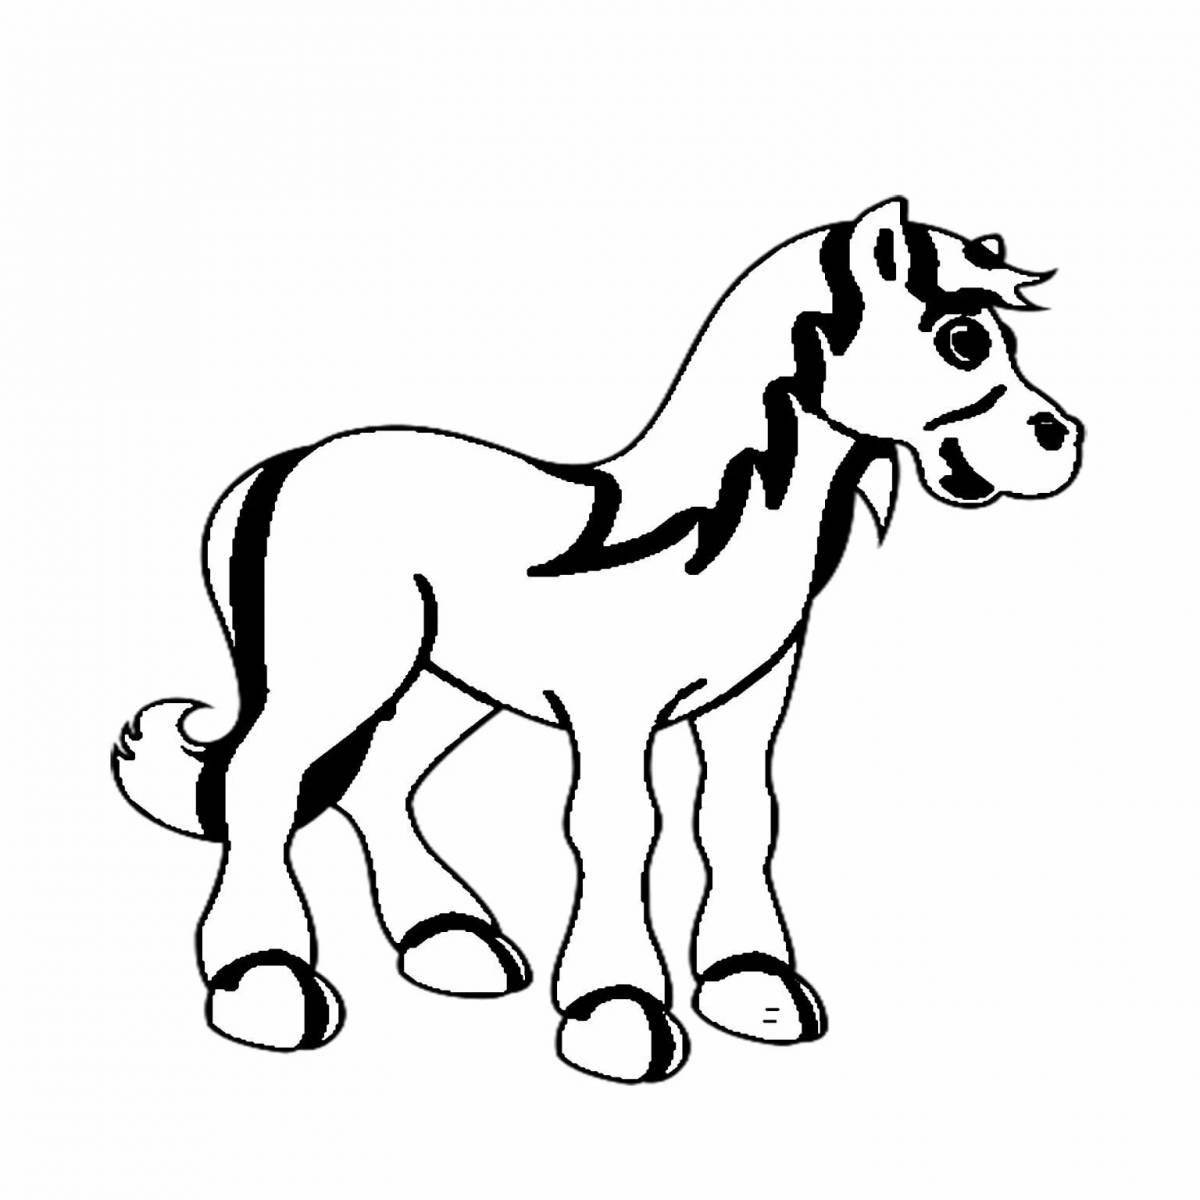 Brightly colored lanky horse coloring page